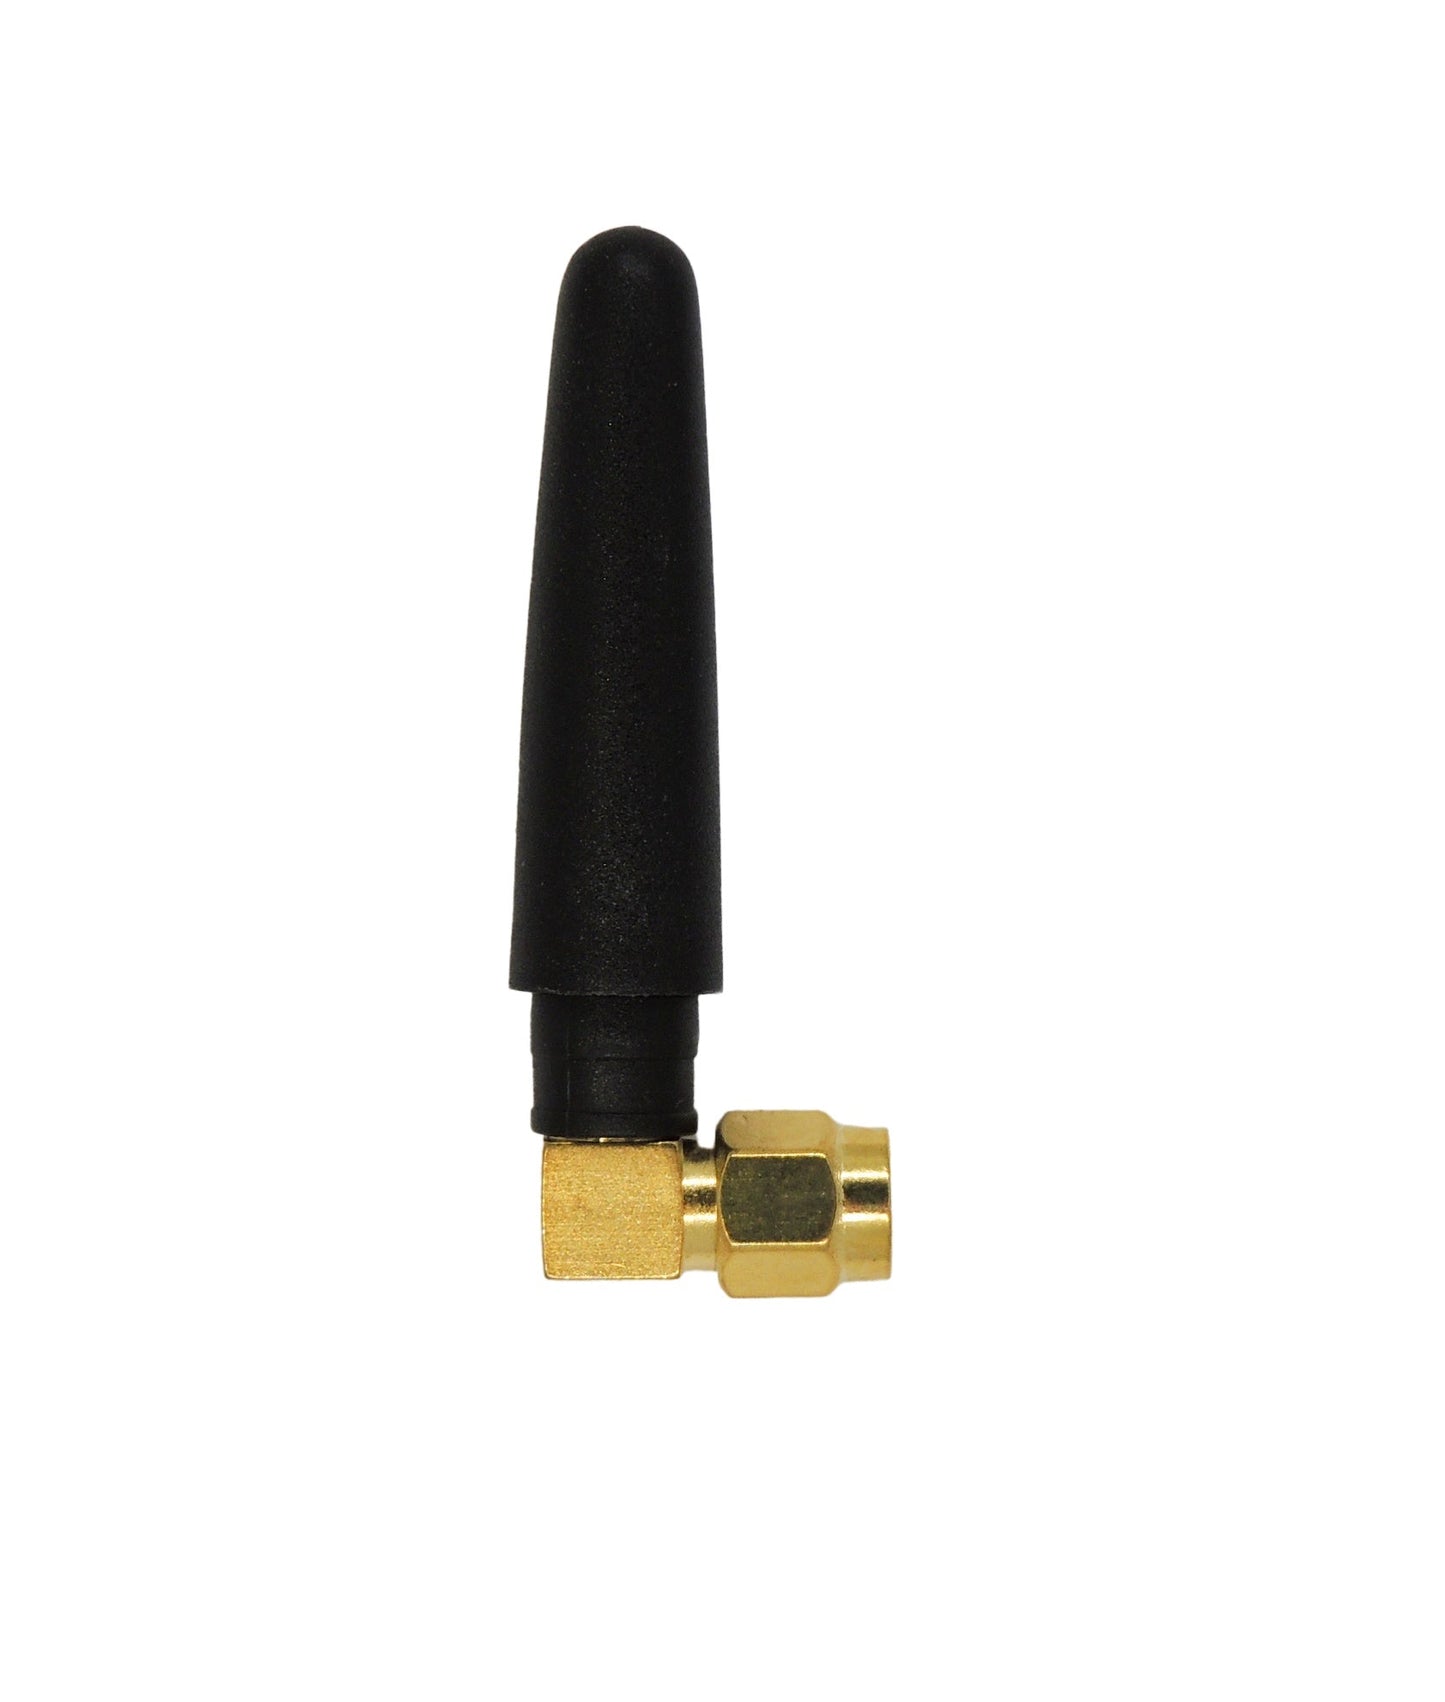 2.4GHz Antenna with 90 Angle